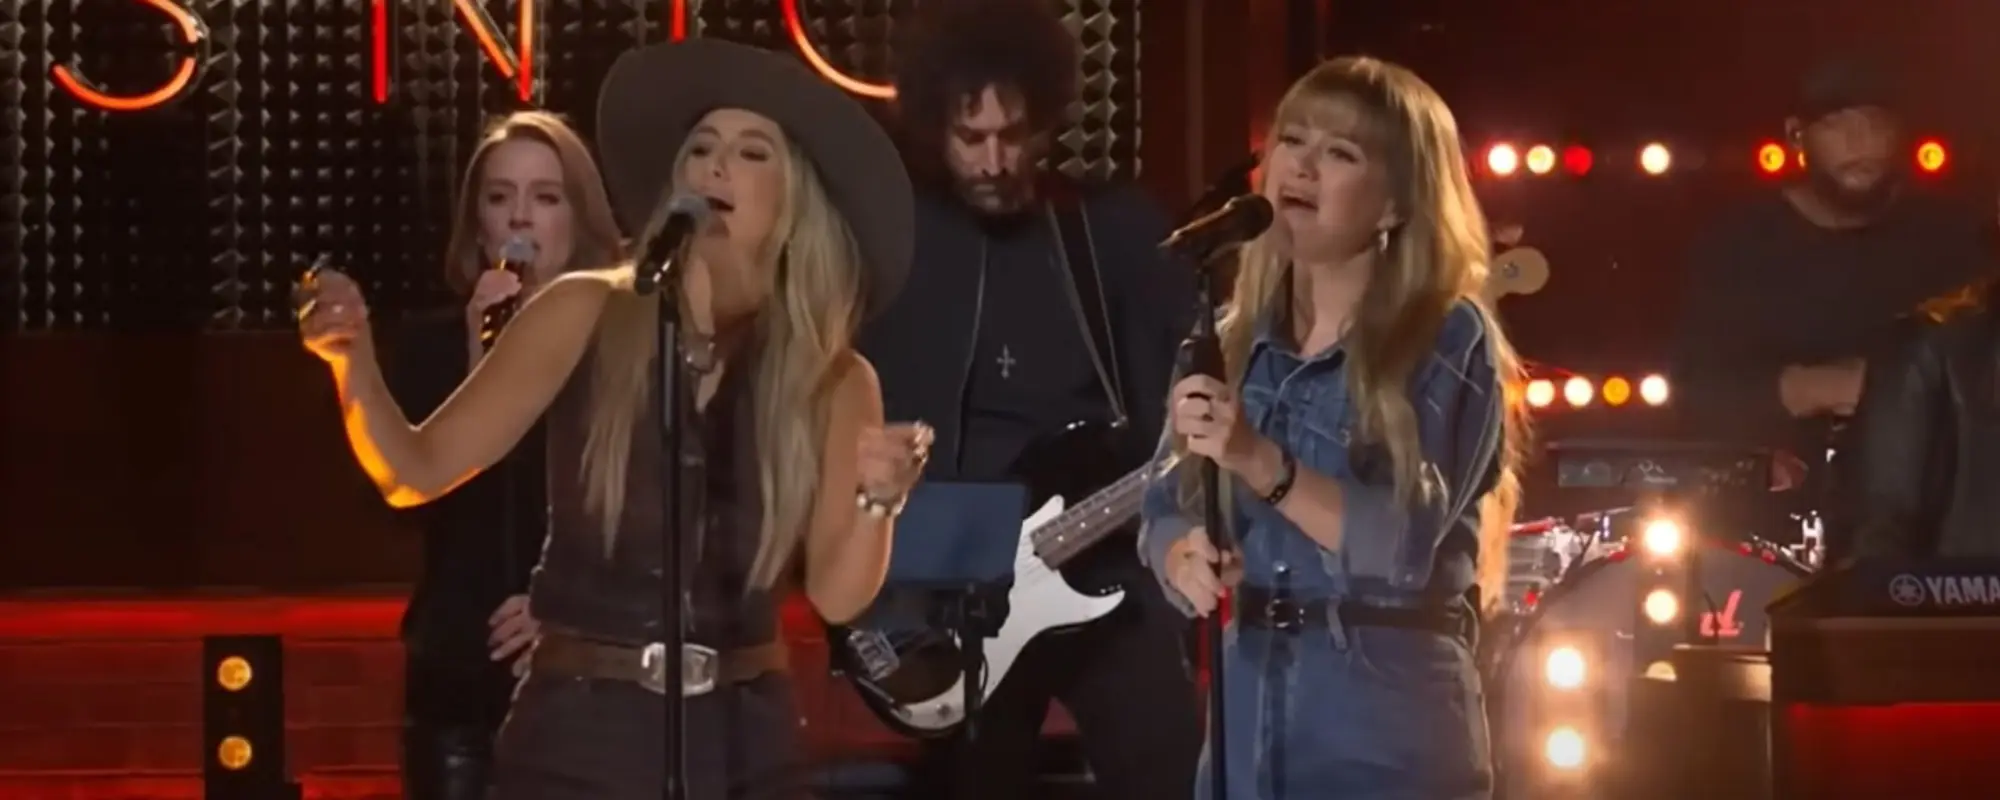 Watch Kelly Clarkson and Lainey Wilson Team Up for a Special Rendition of “Country’s Cool Again”